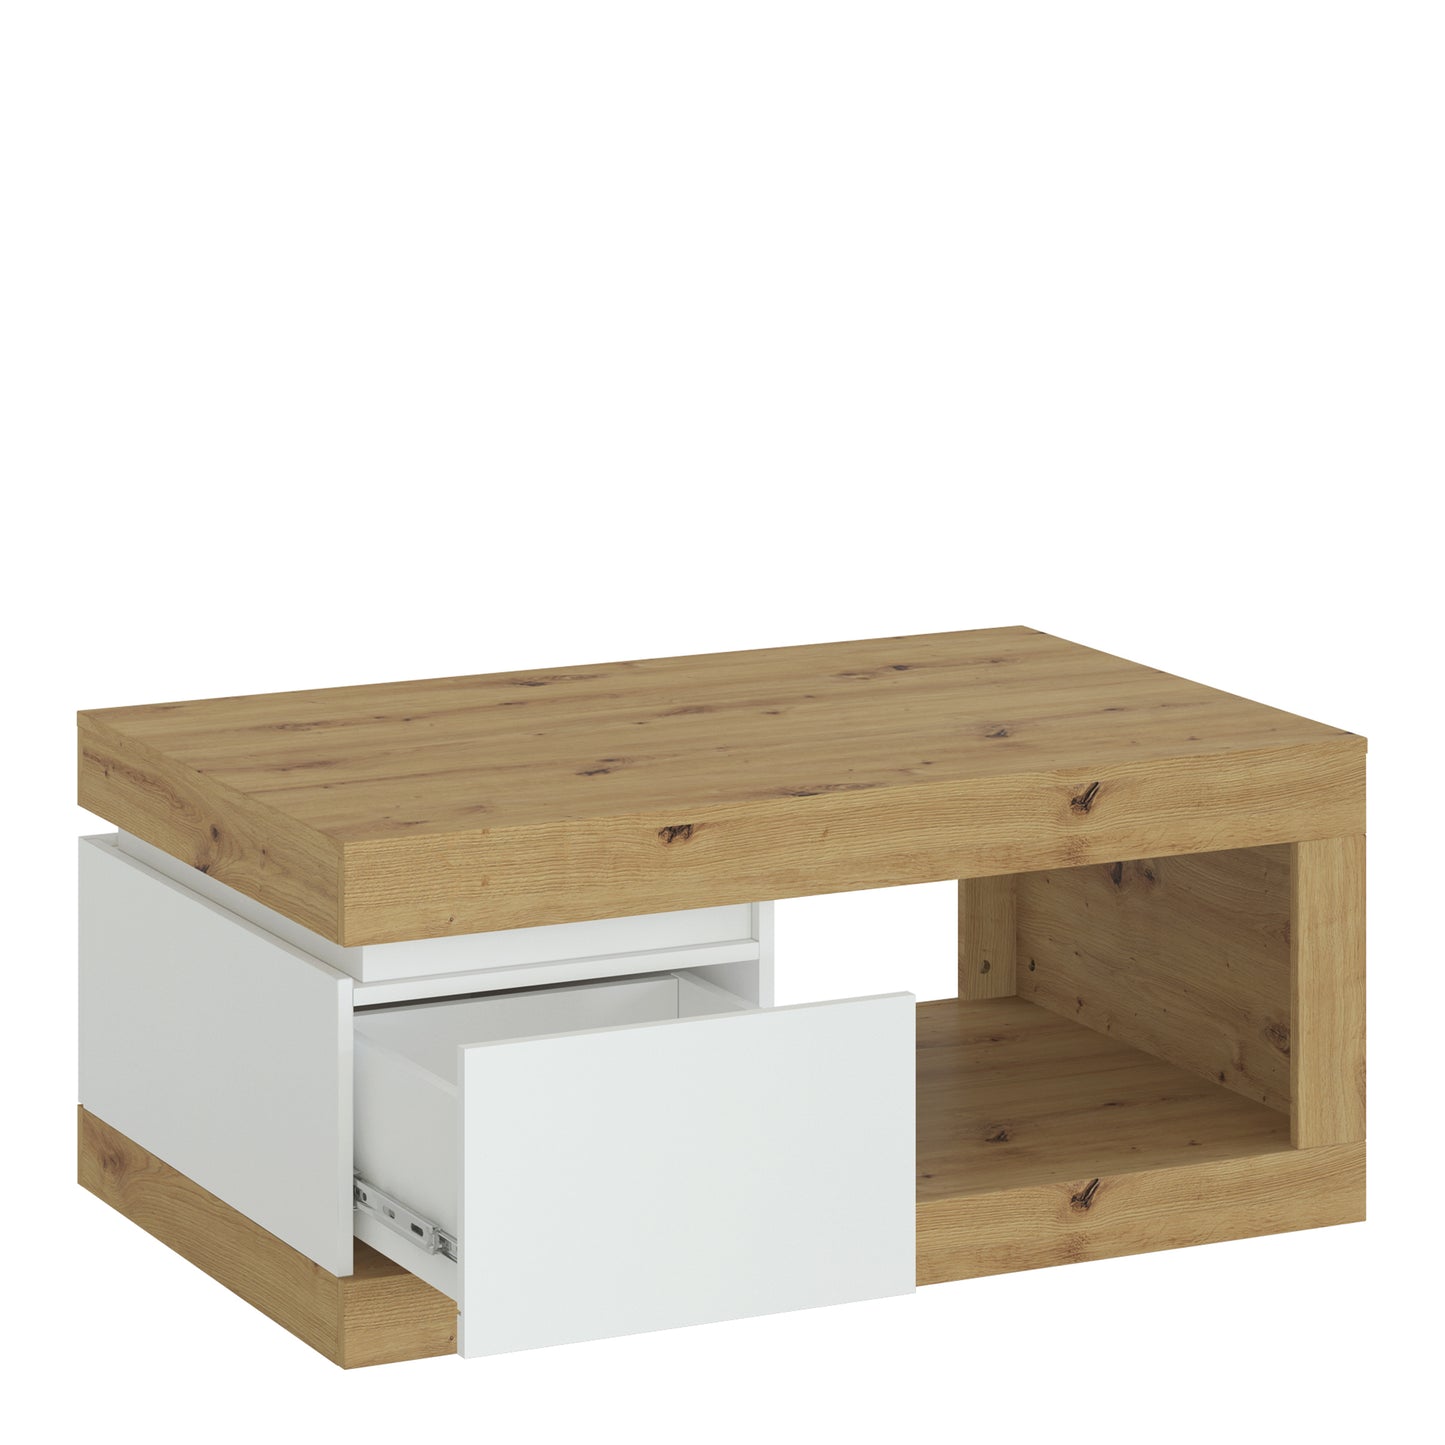 Luci Bright Luci 1 drawer coffee table in White and Oak